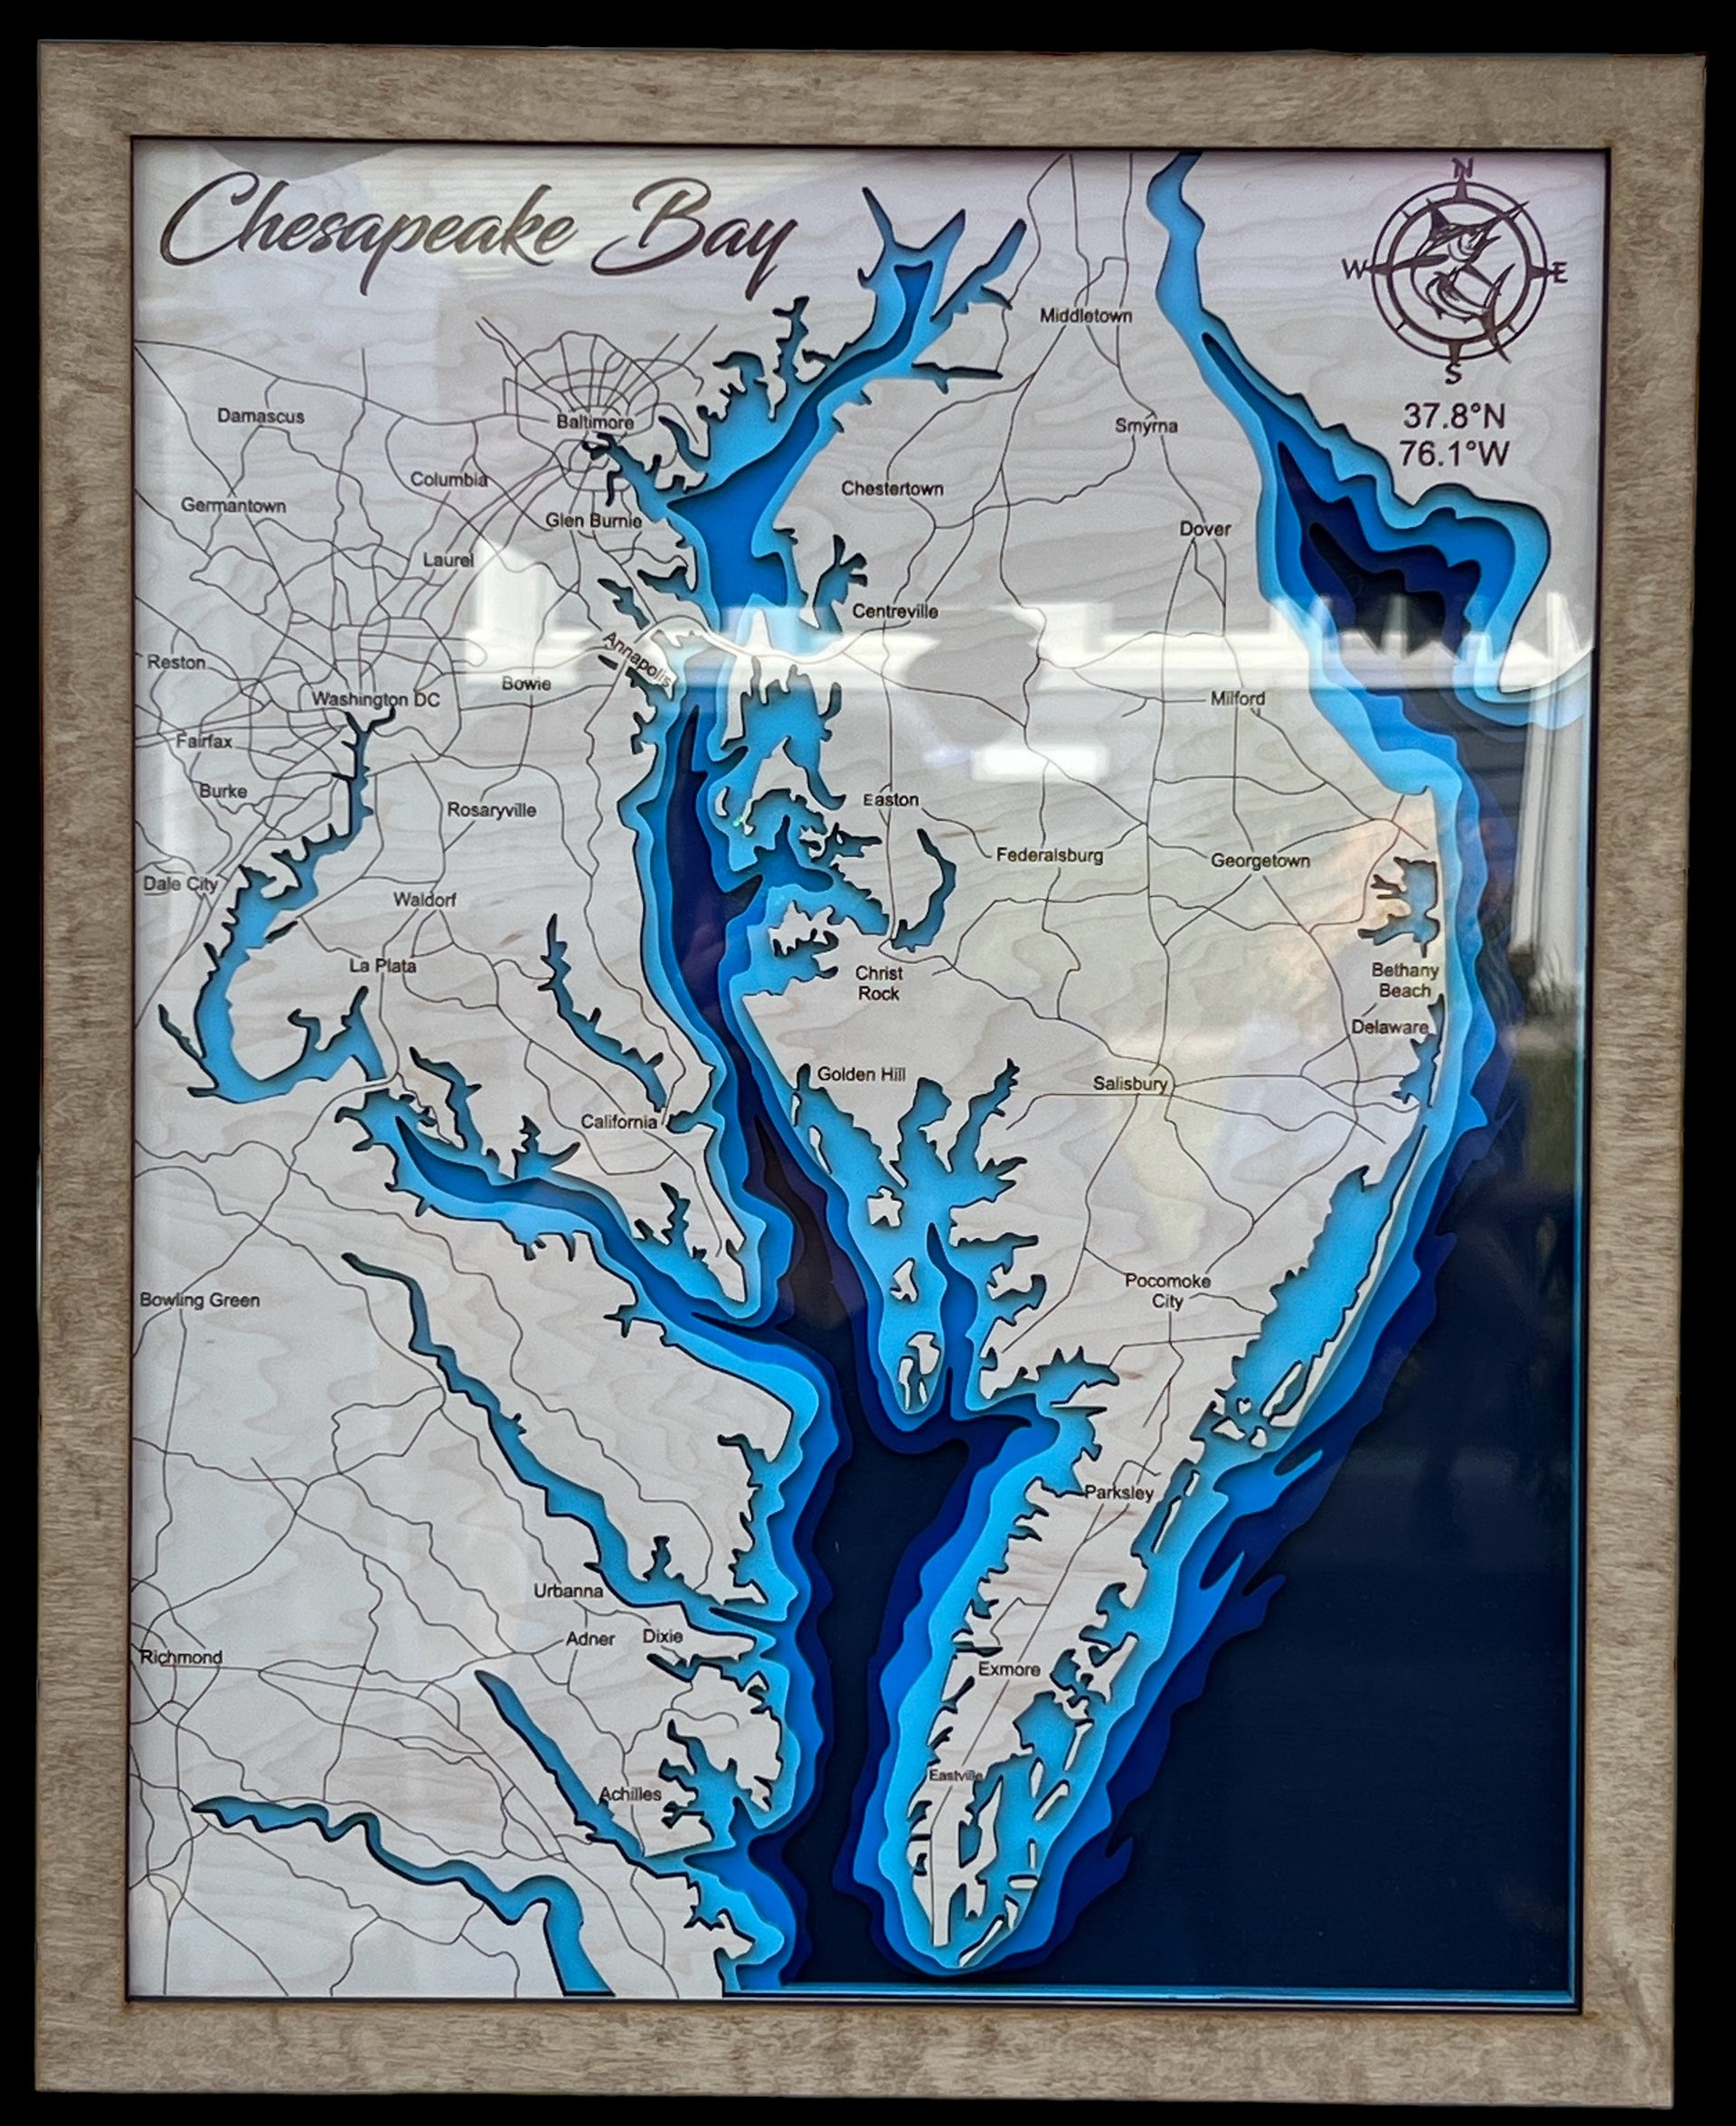 Load video: I was making the top layer of a 38x48 map of the Chesapeake Bay